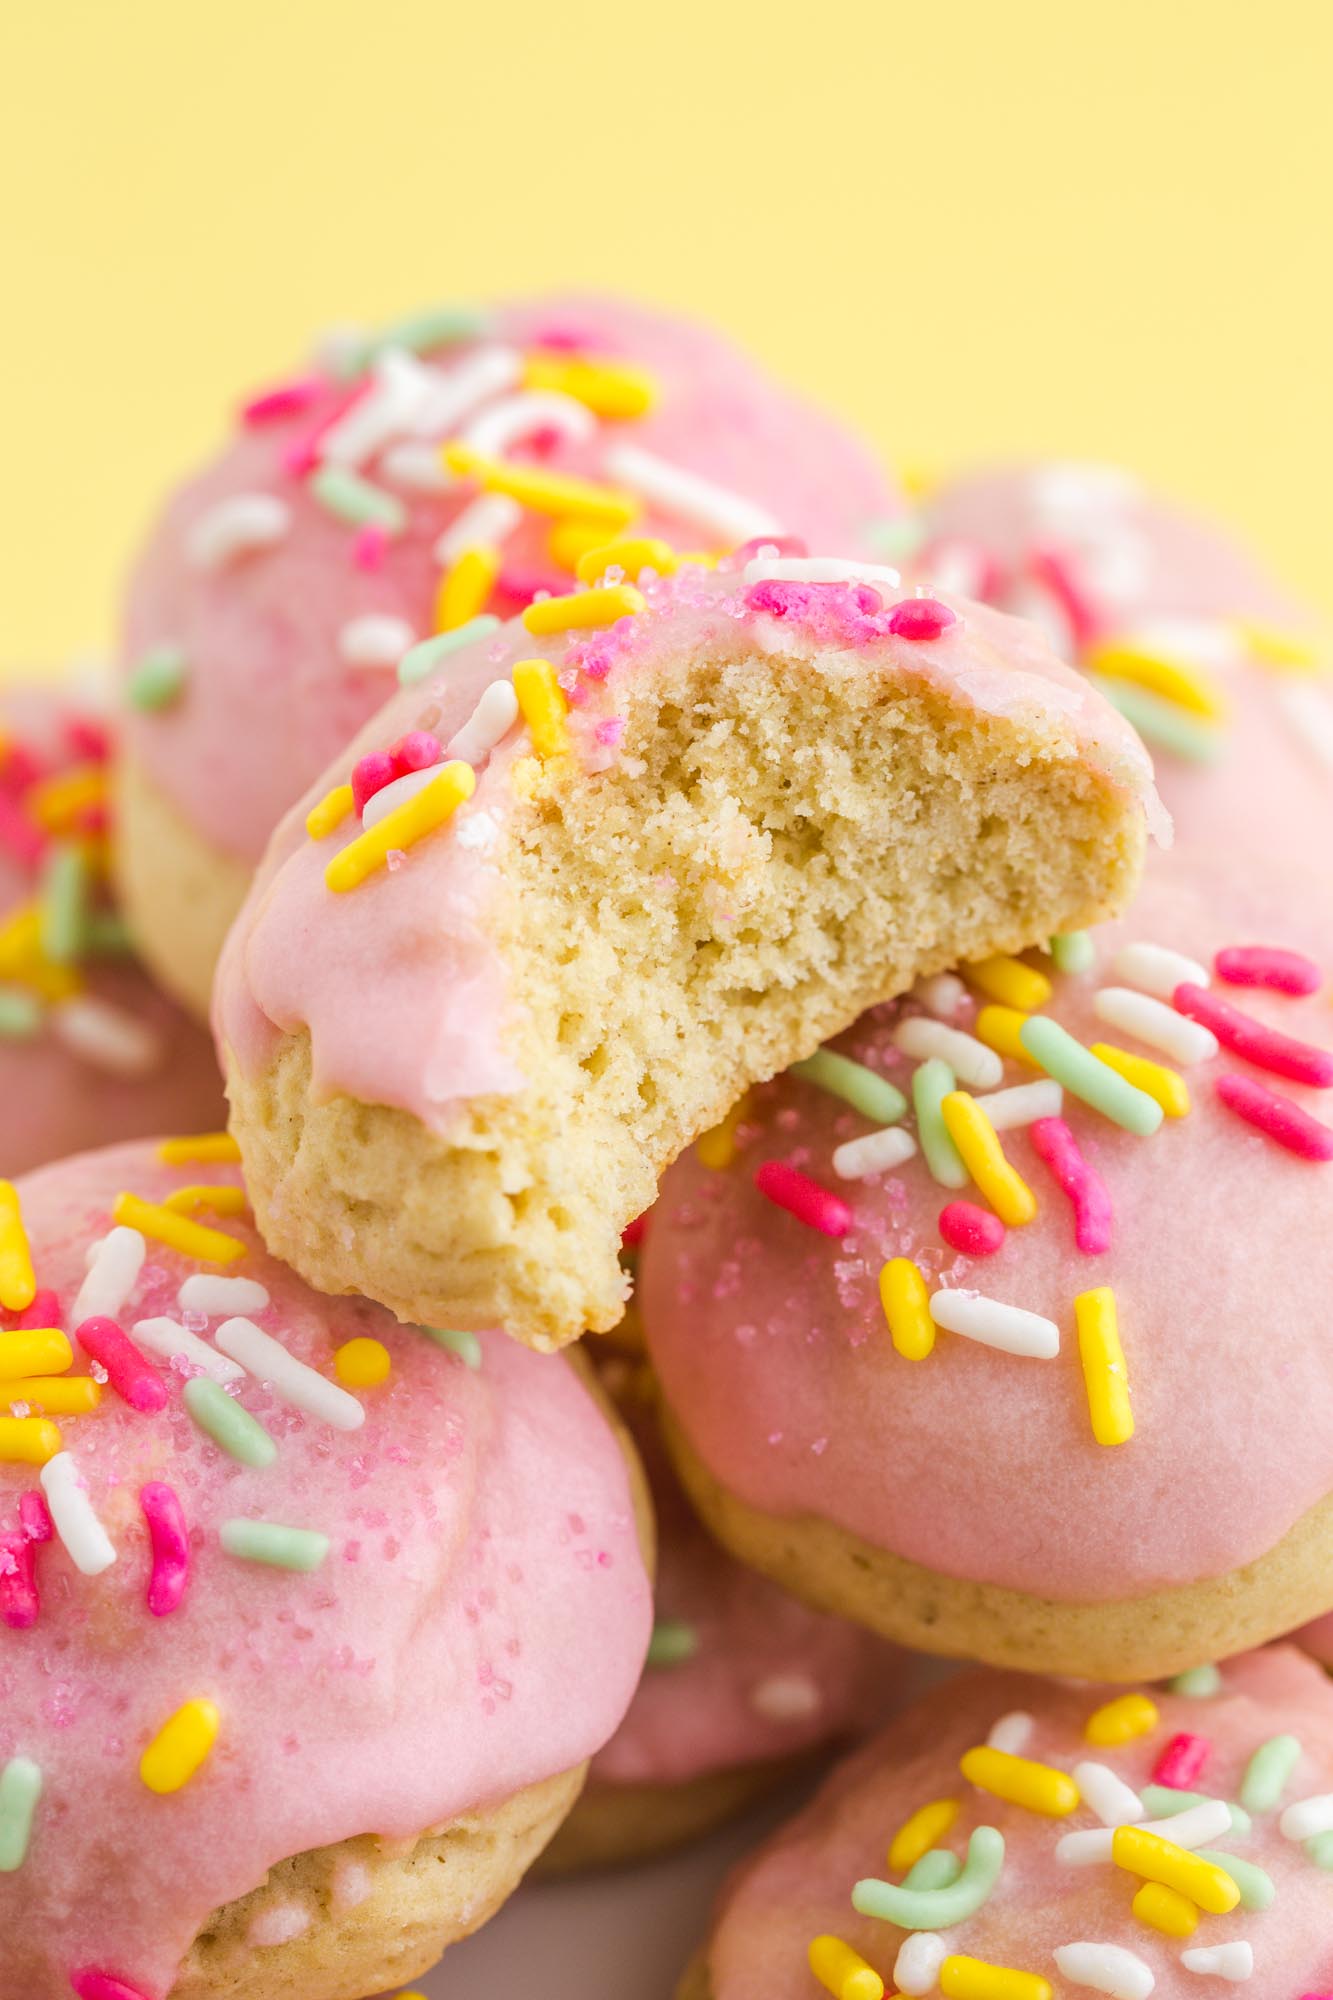 closeup view of a pile of italian cookies with pink frosting and sprinkles. One has had a bite taken, showing the texture inside.